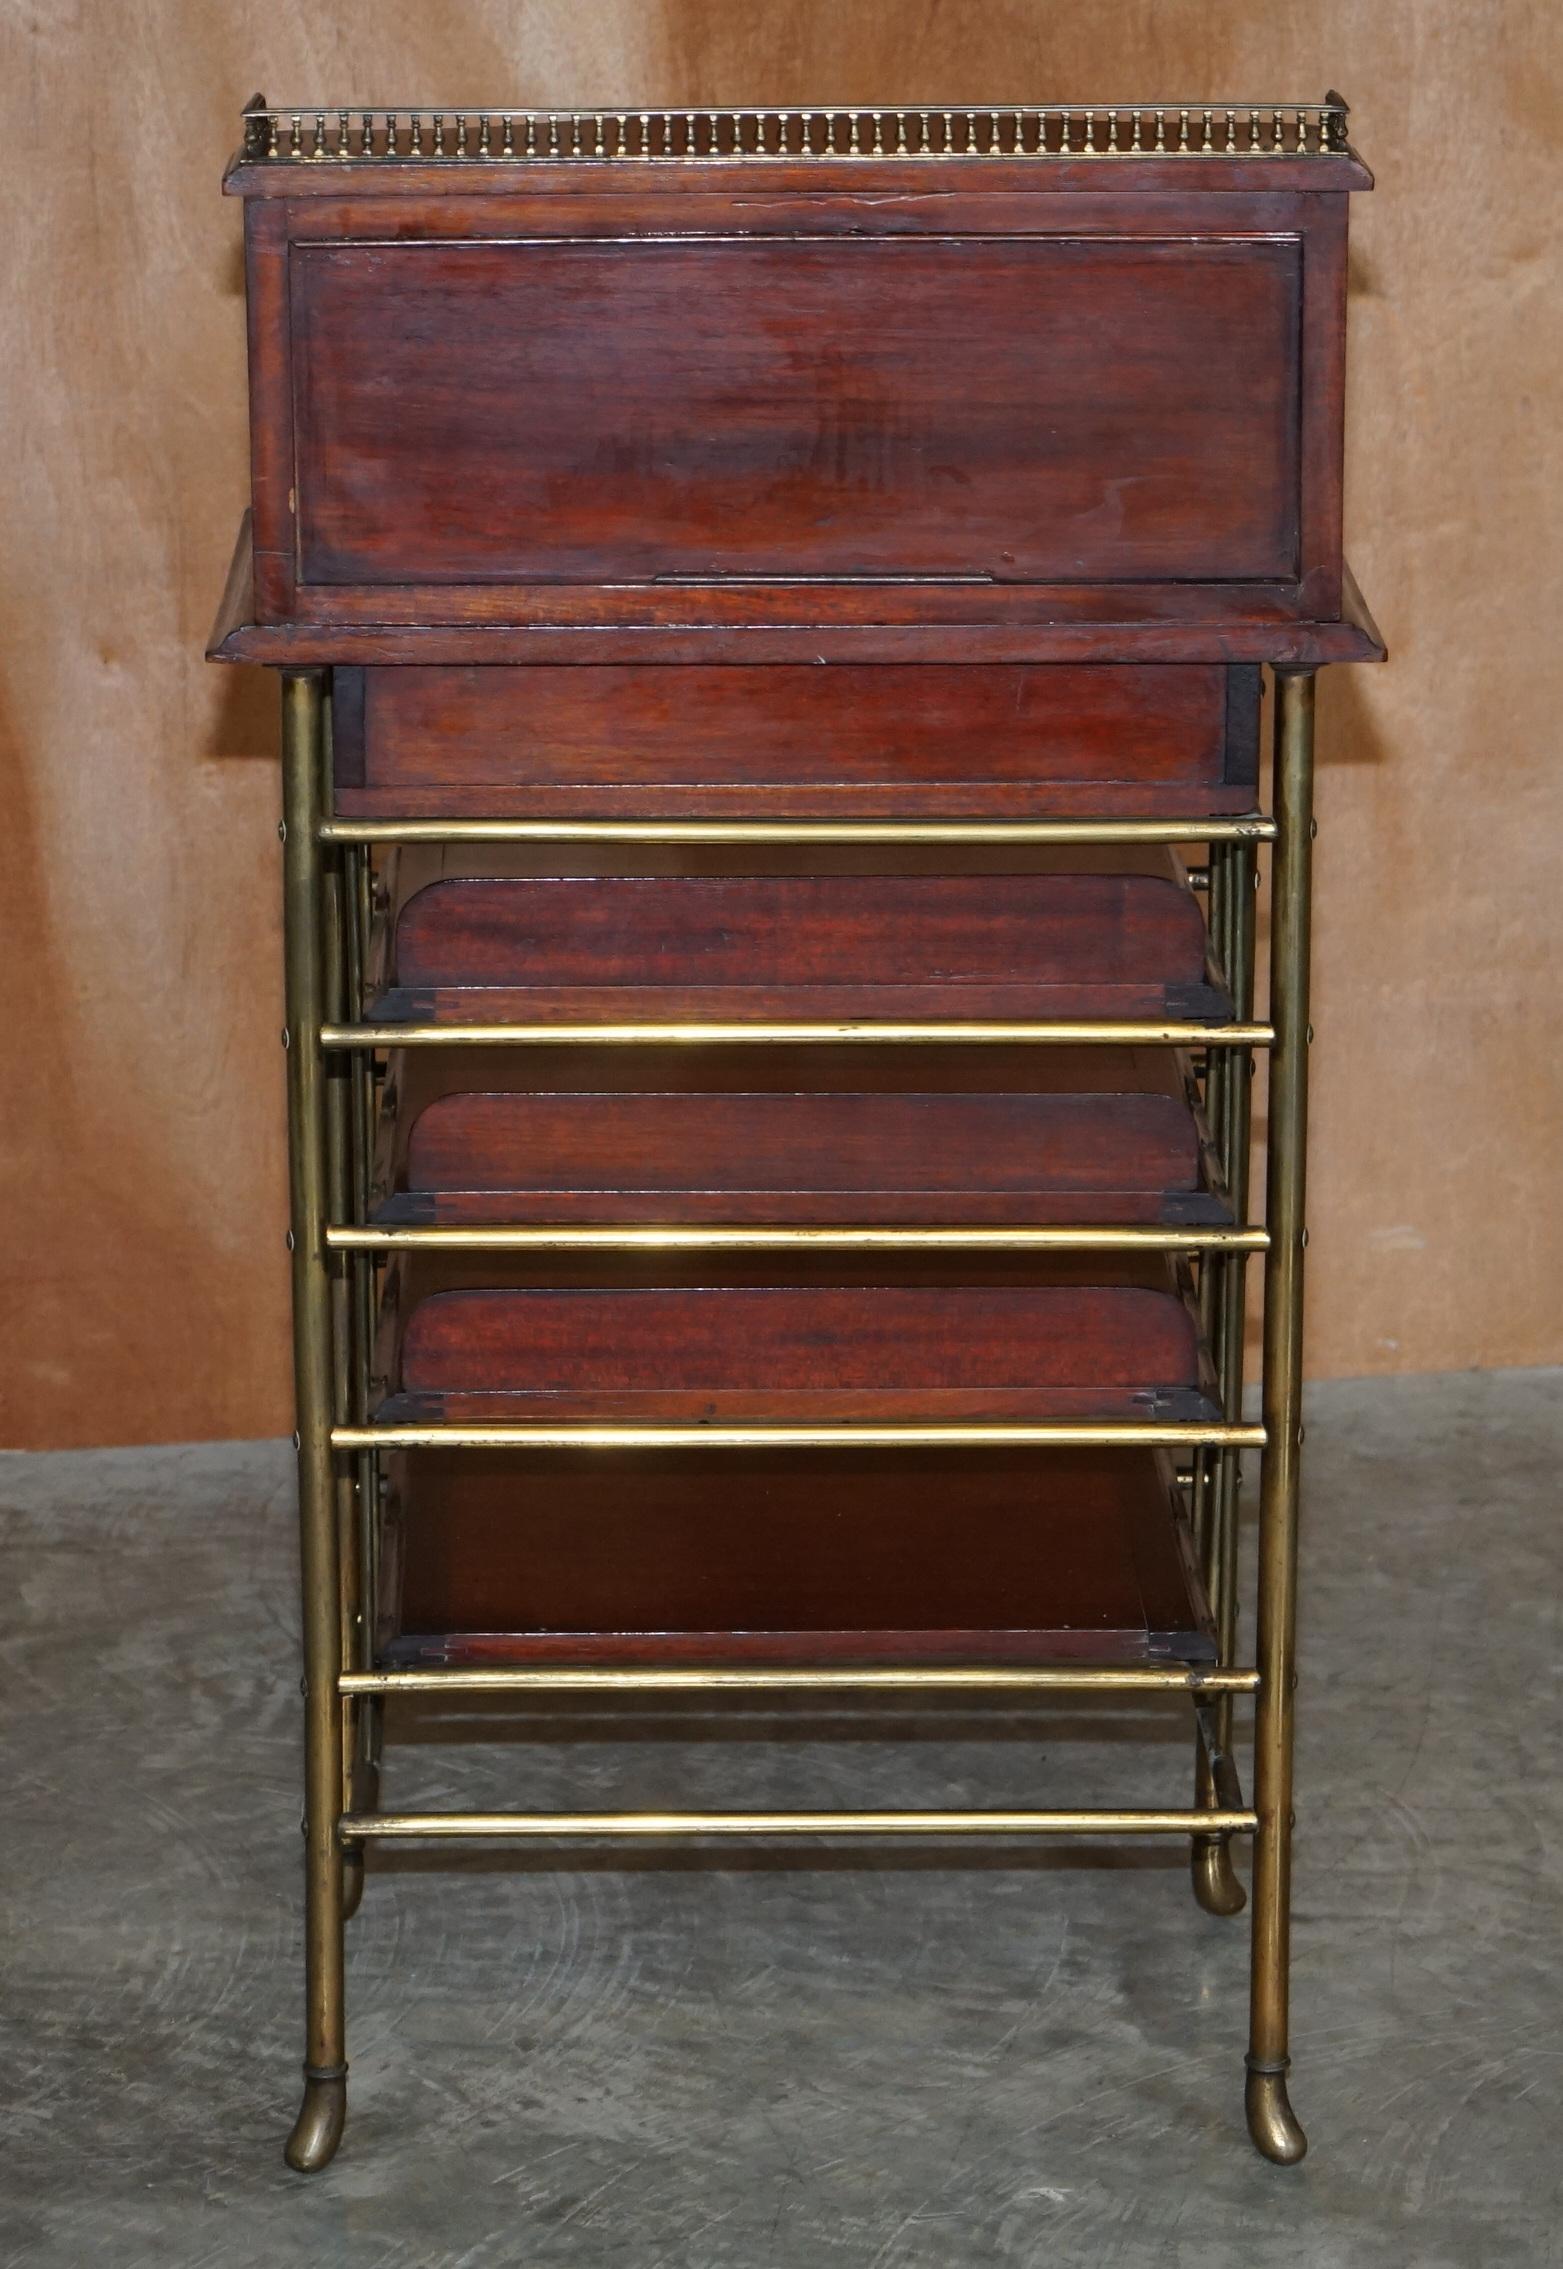 Regency circa 1810 Gilt Bronze and Hardwood Sheet Music Stand Chest of Drawers For Sale 9